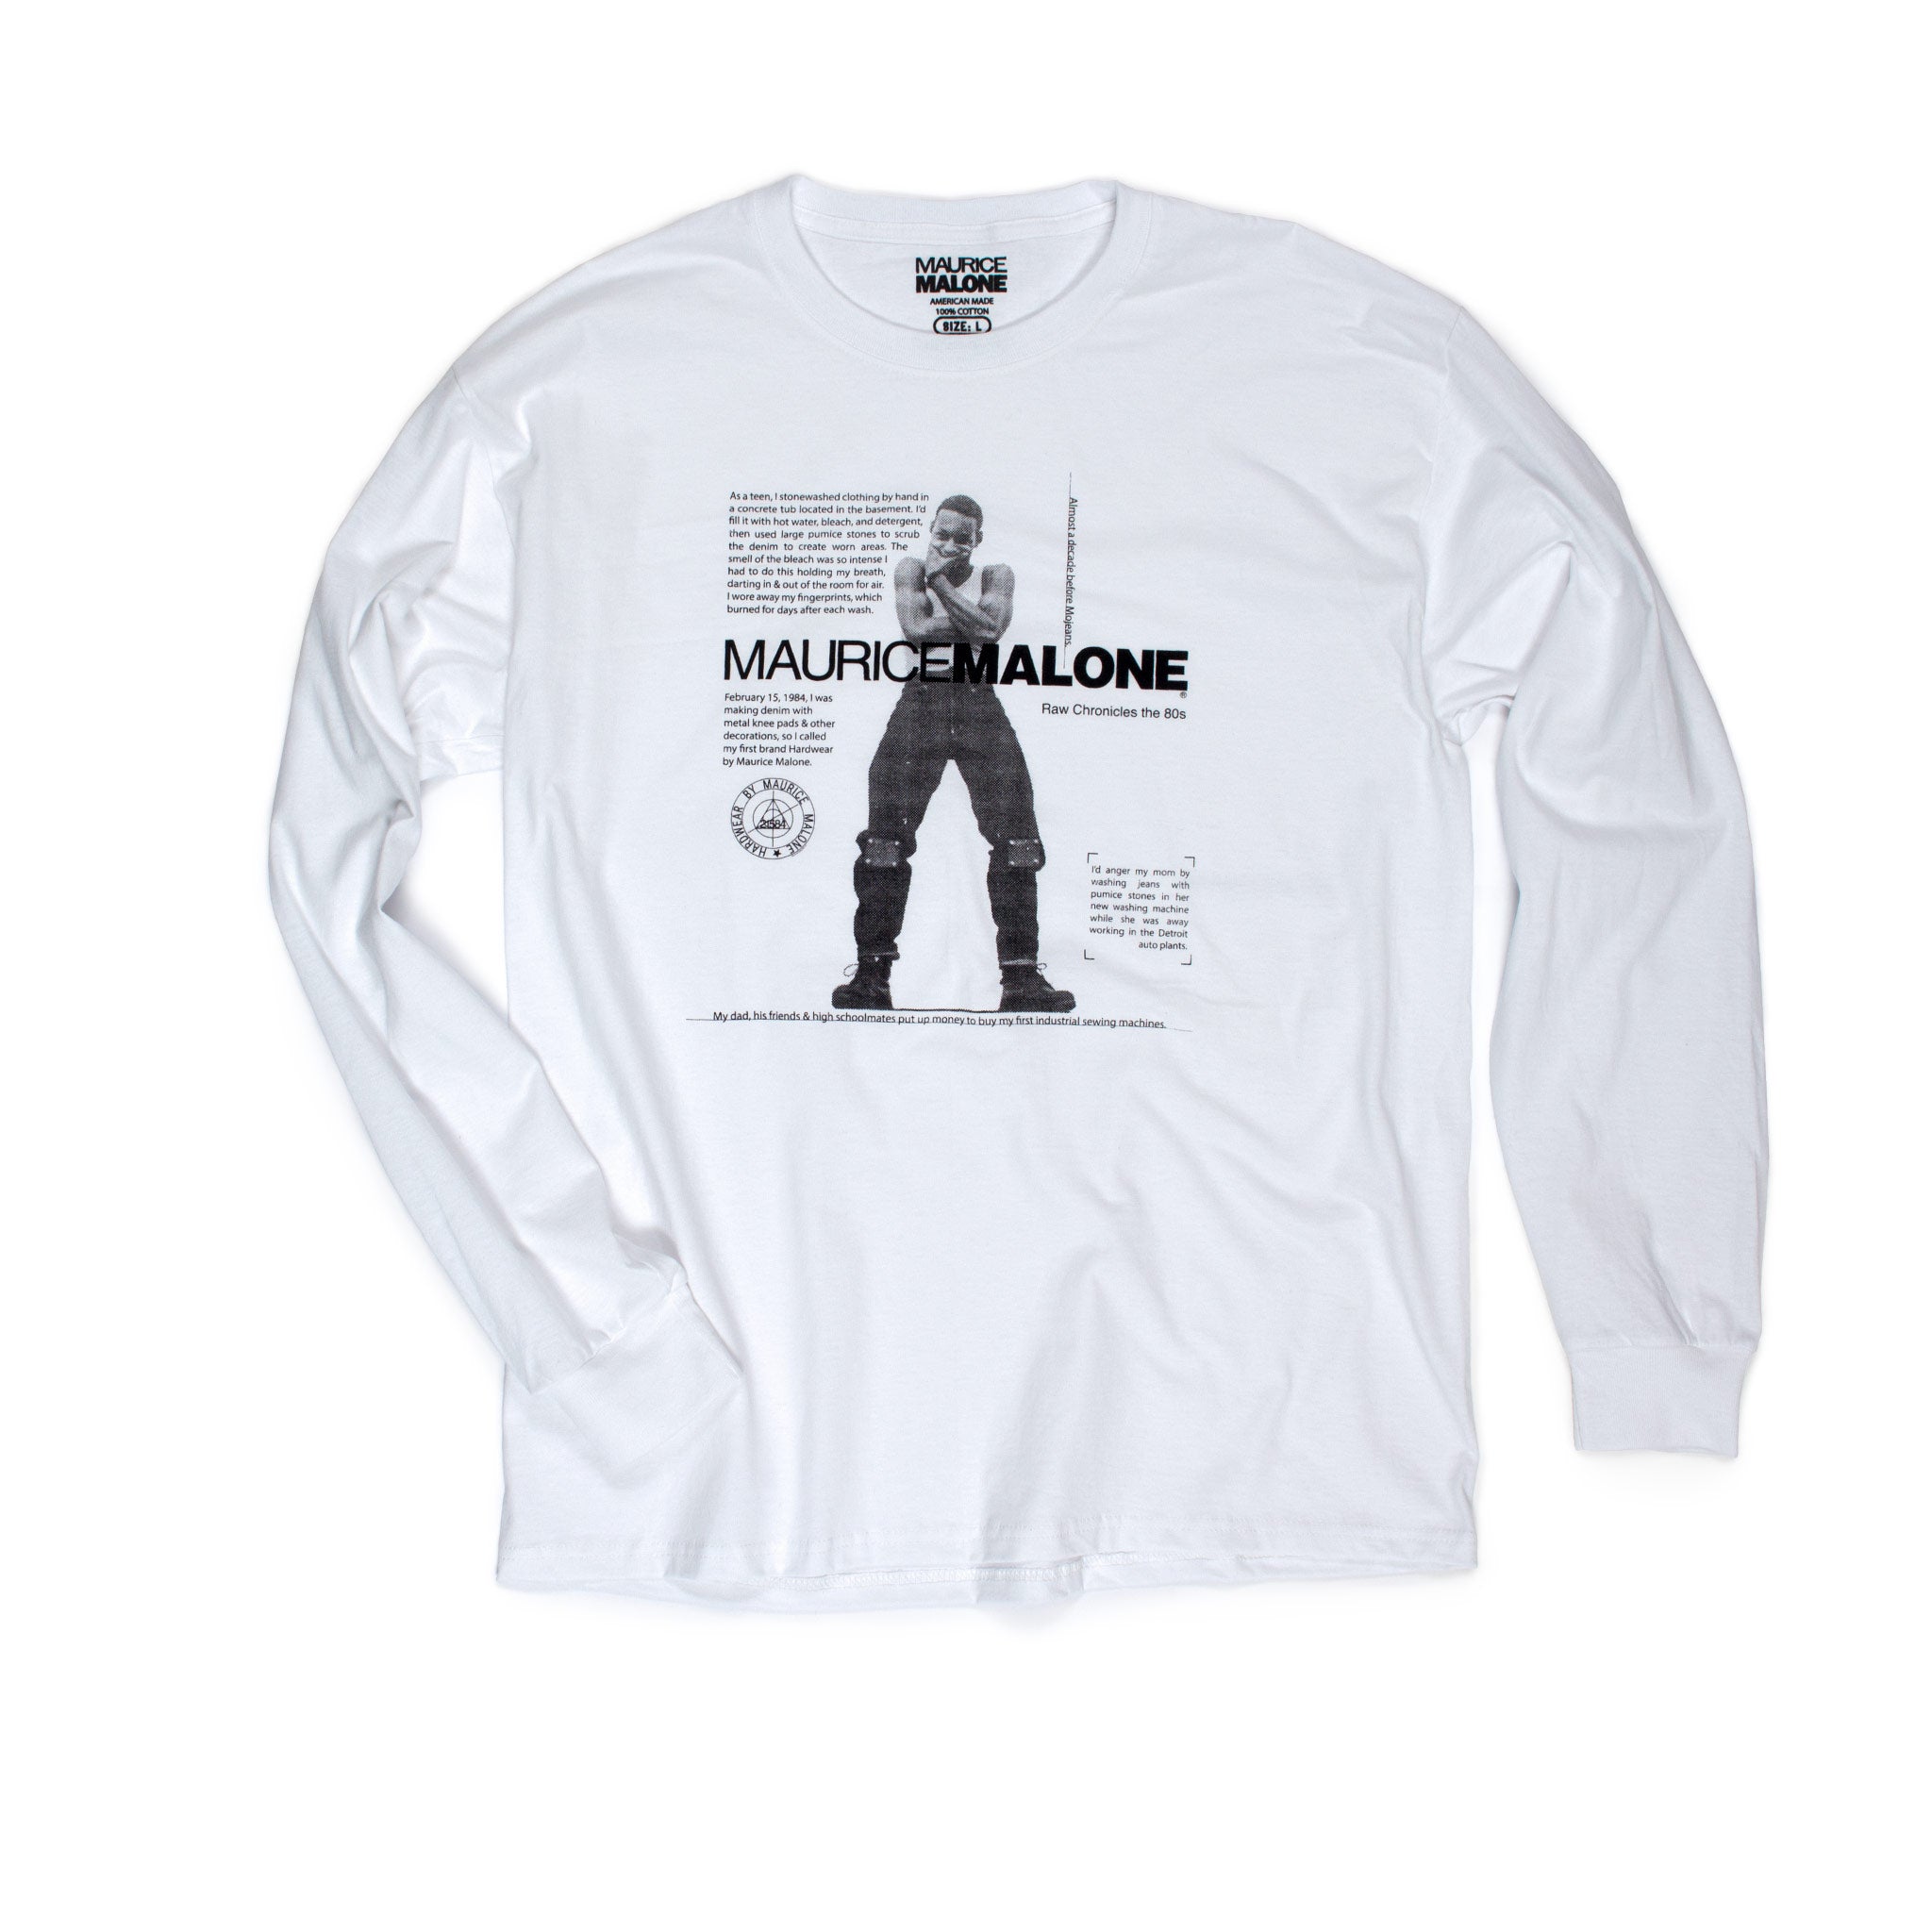 The 80s history of African American streetwear & hip hop denim designer Maurice Malone on long sleeve white t-shirt